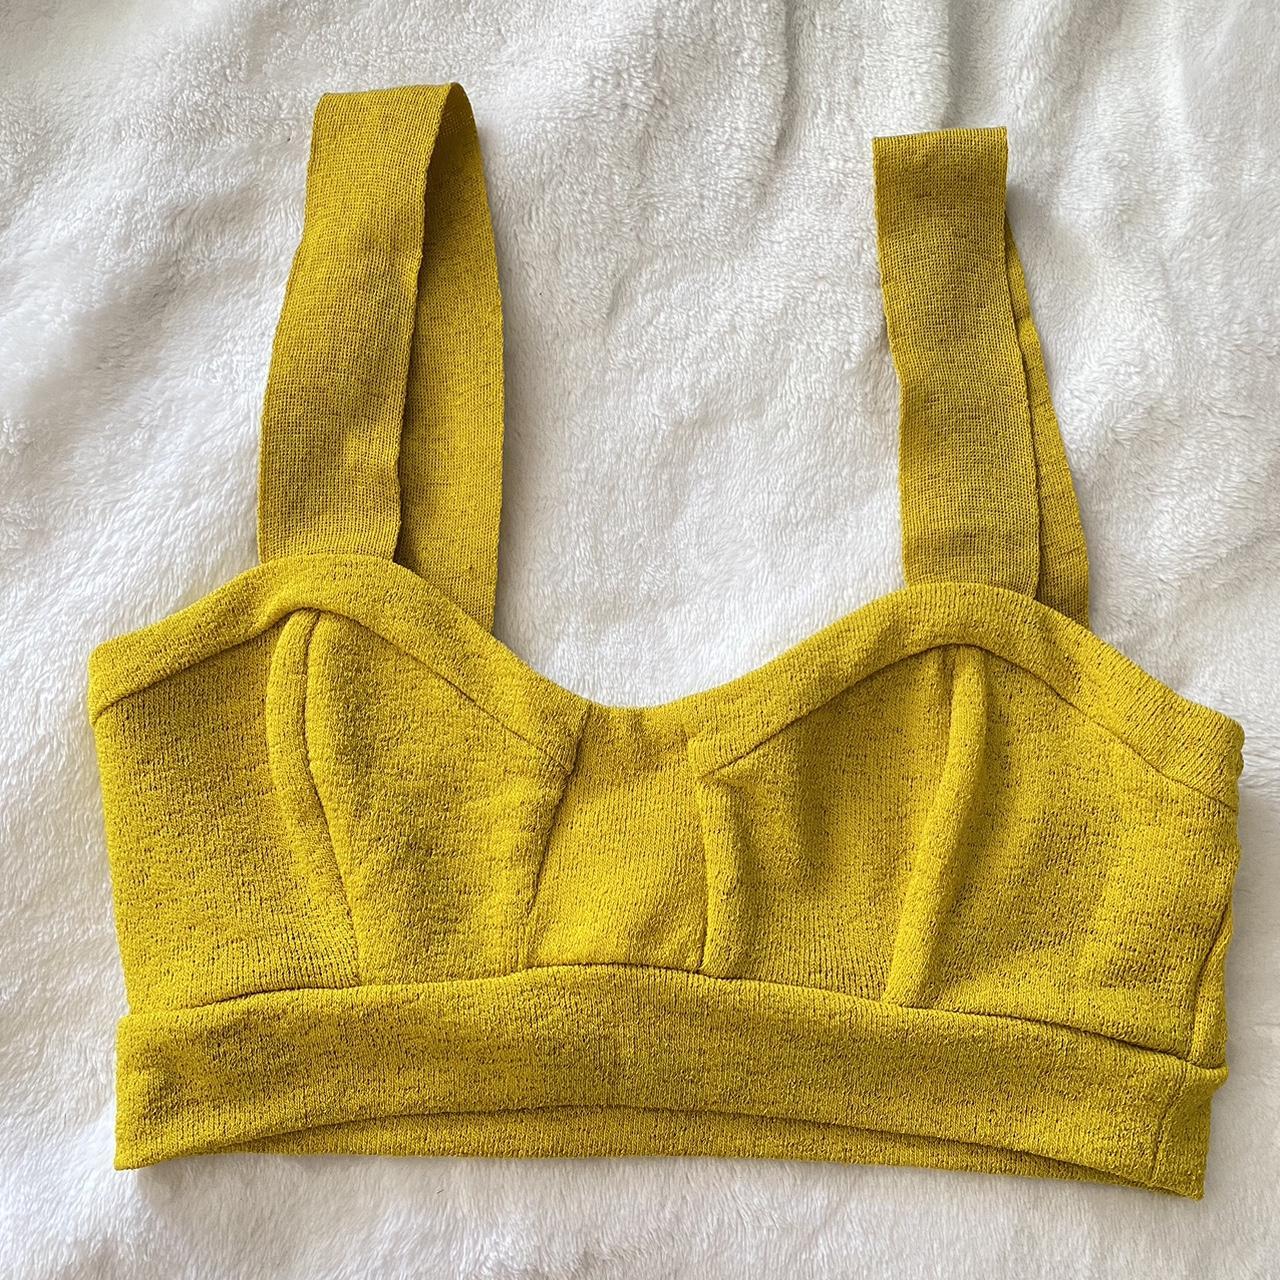 Zara Embroidered Bralette Top Has safety pin on left - Depop